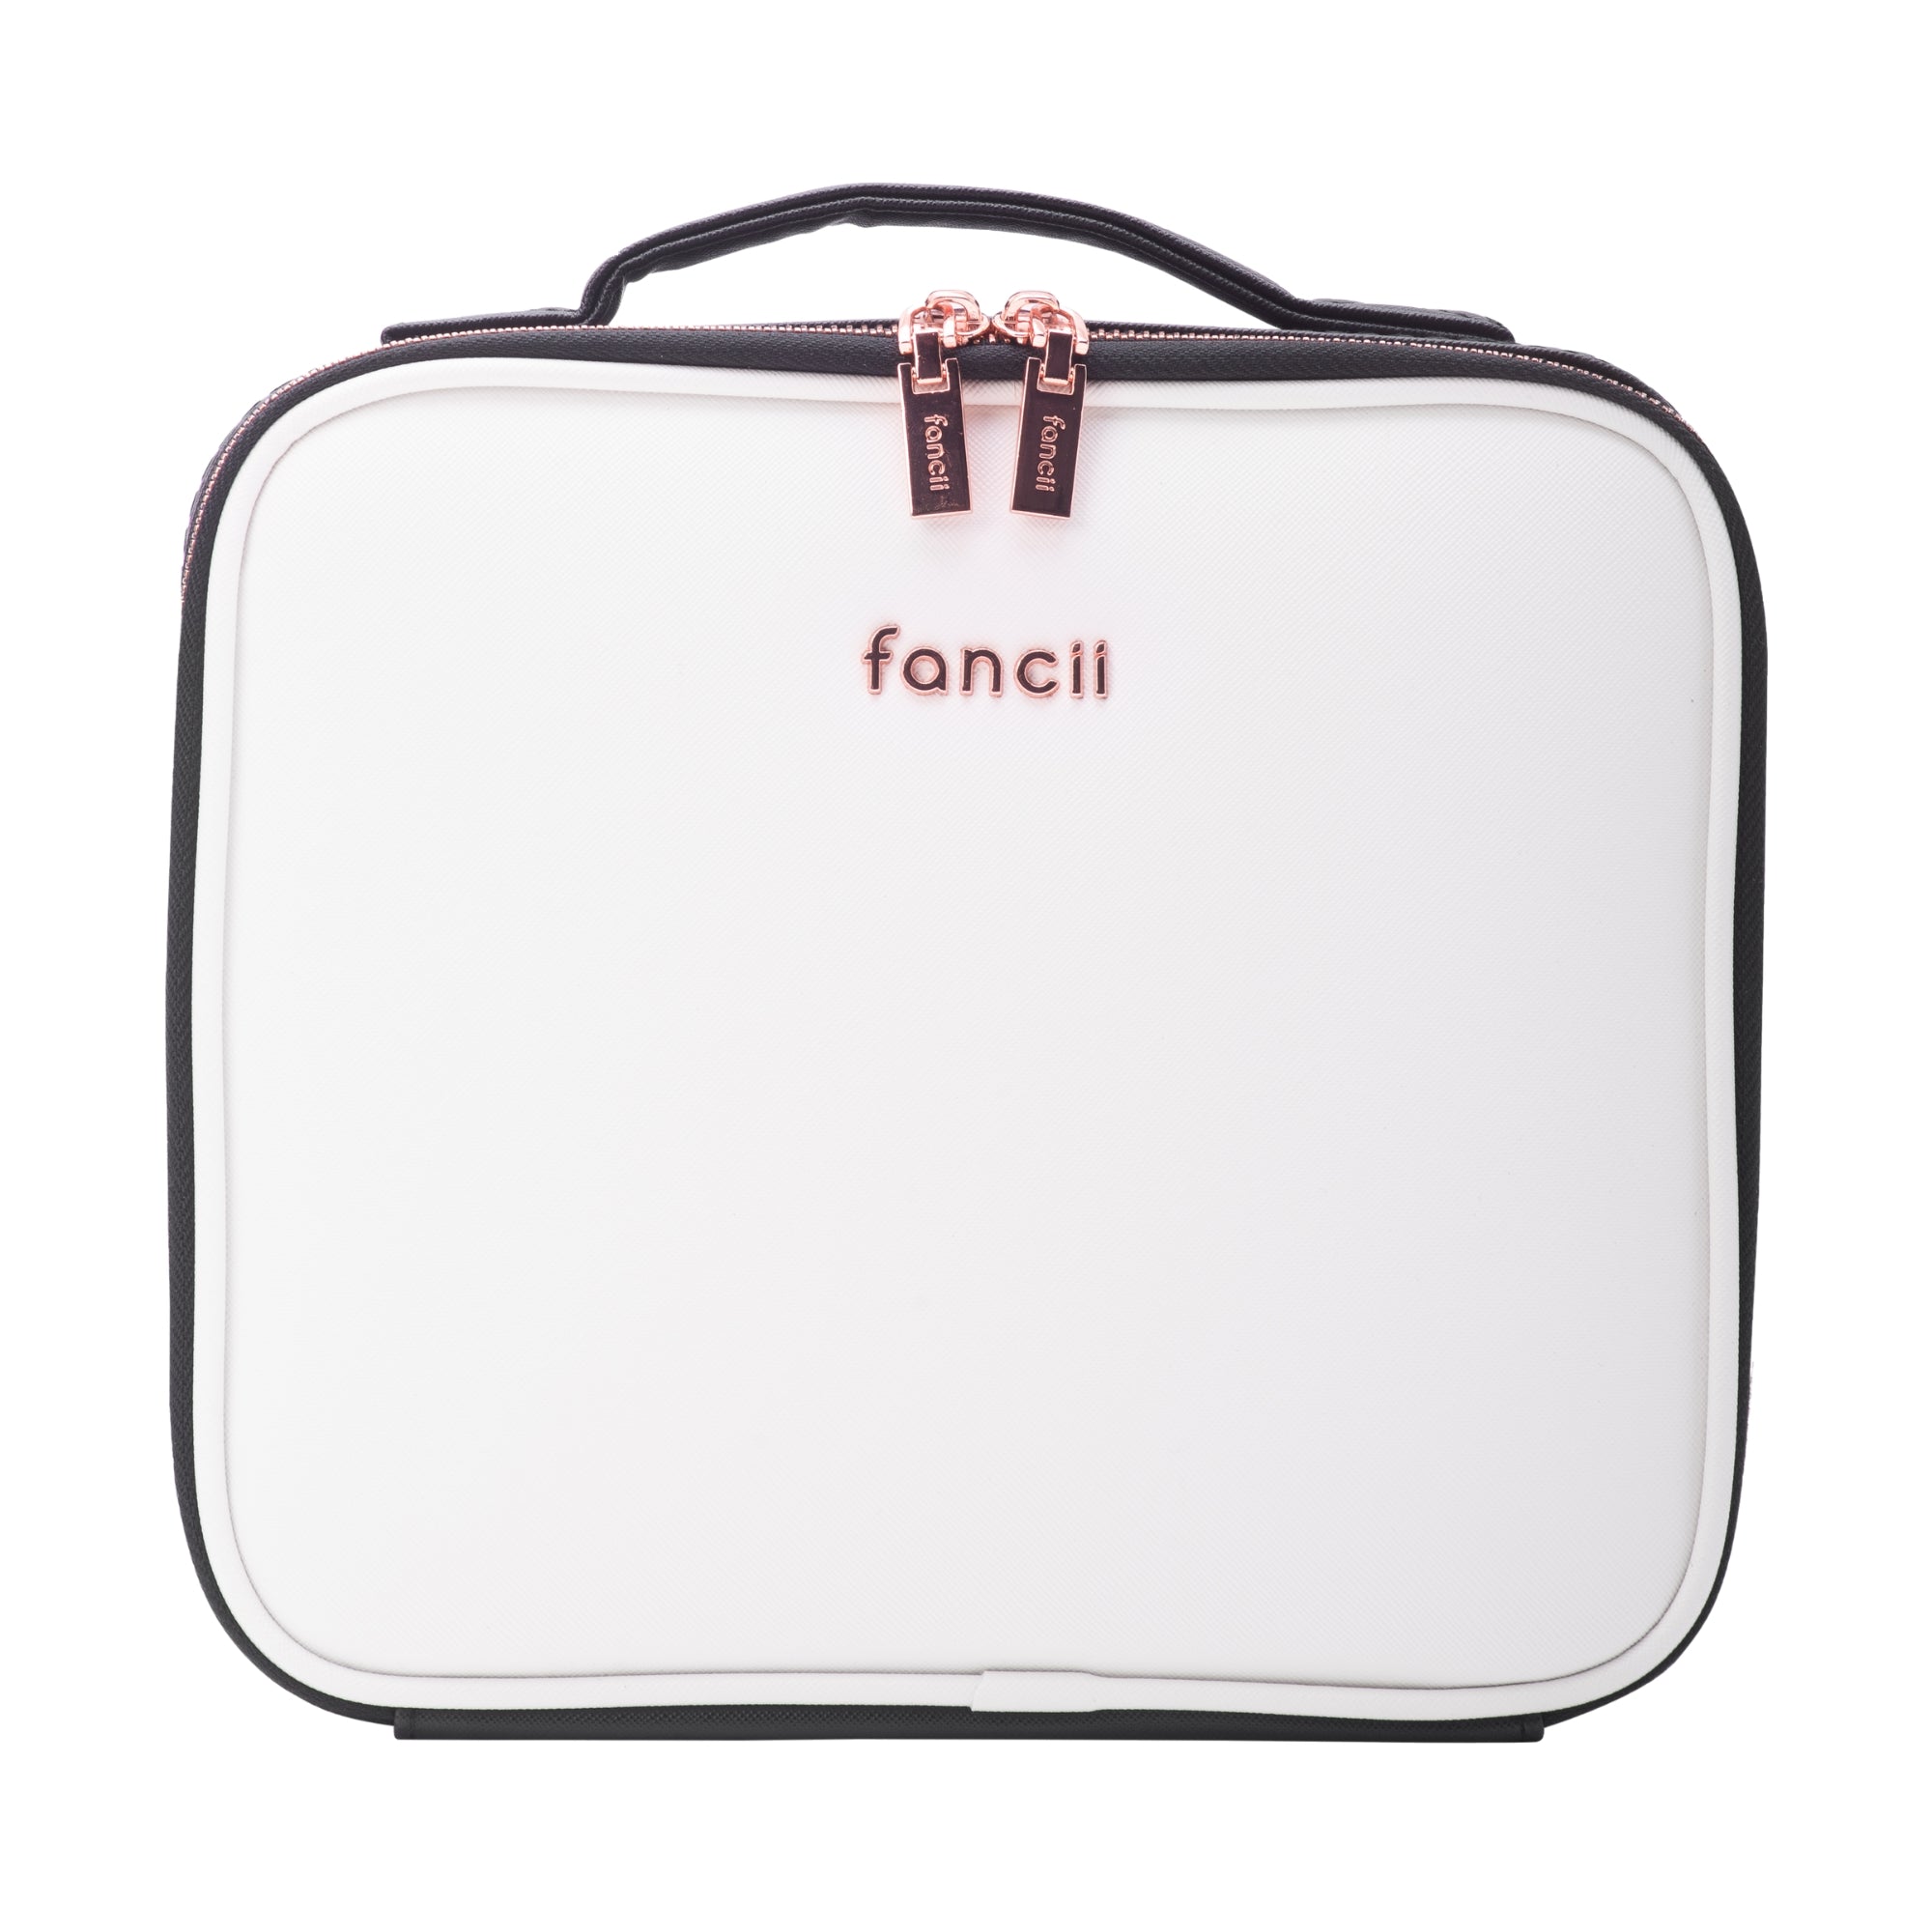 Fancii Madison Small Makeup Case - Weekender / SMALL